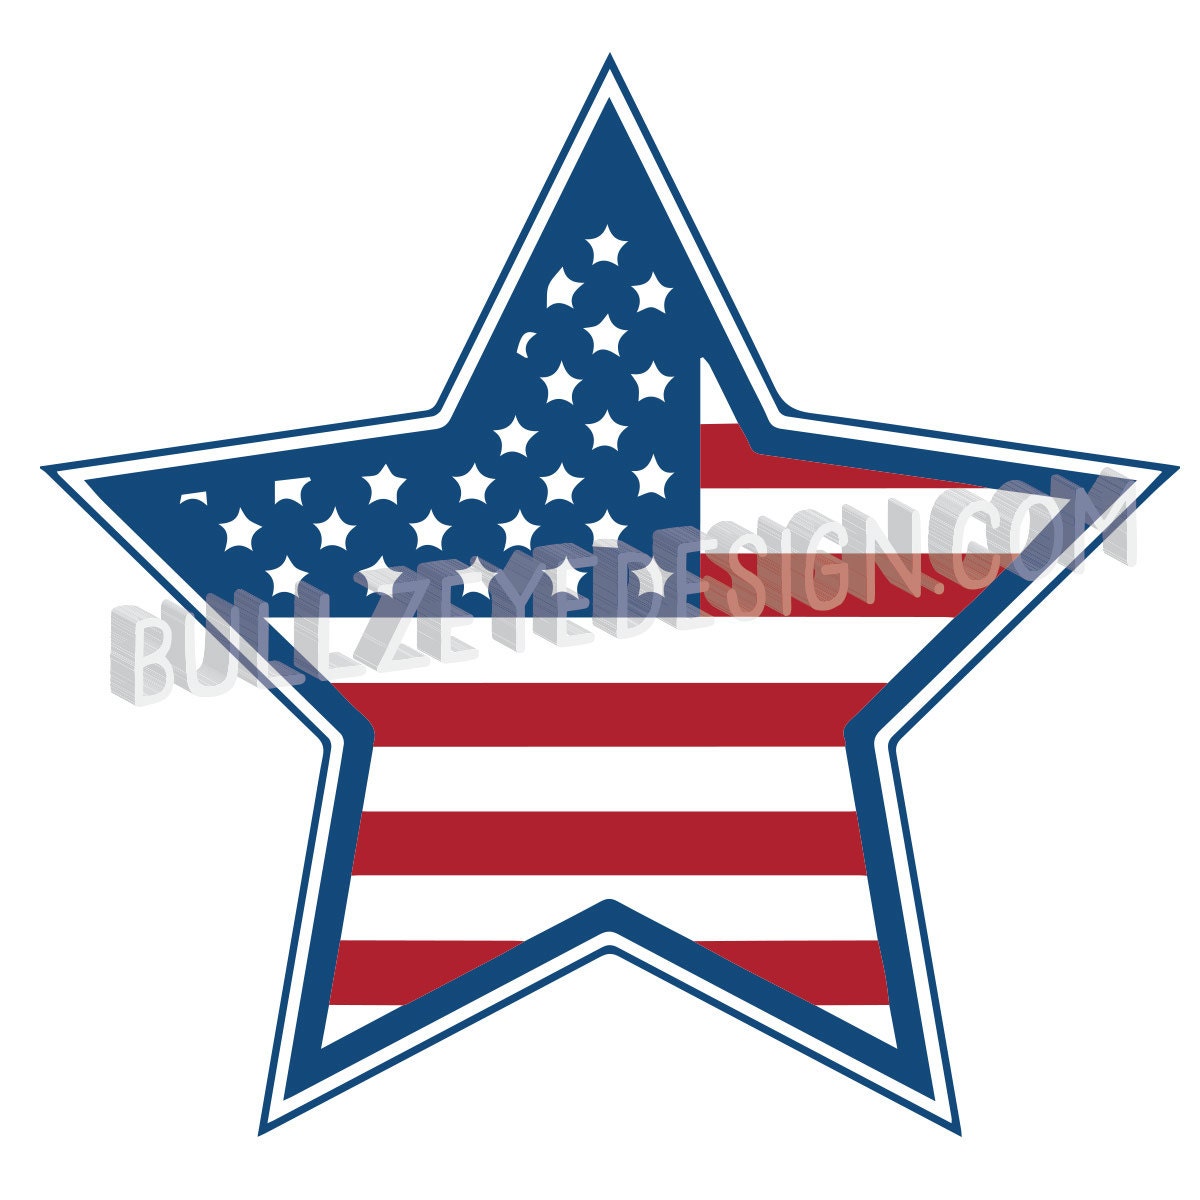 Download Land of the free because of the brave, Cricut svg ...